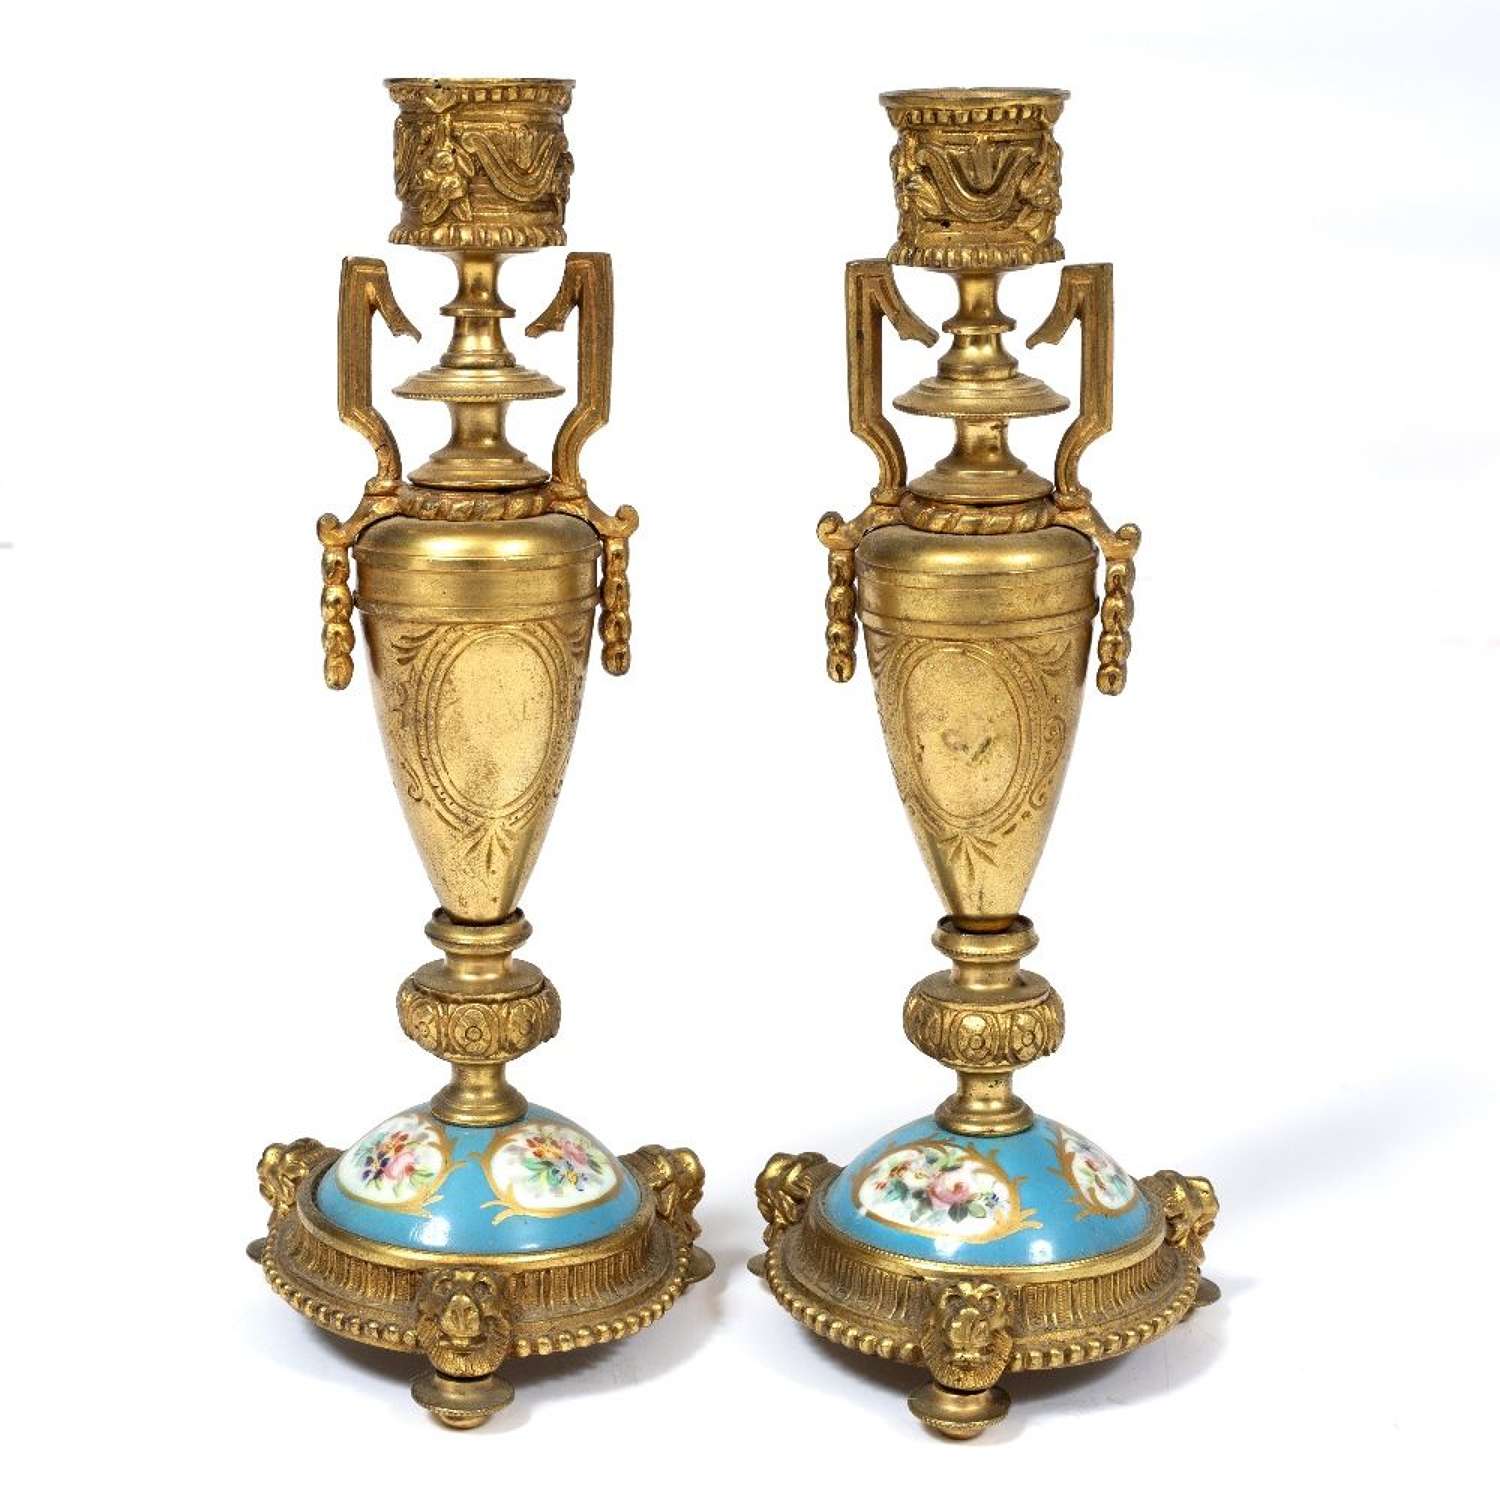 Pair of Continental Candlesticks c.1900